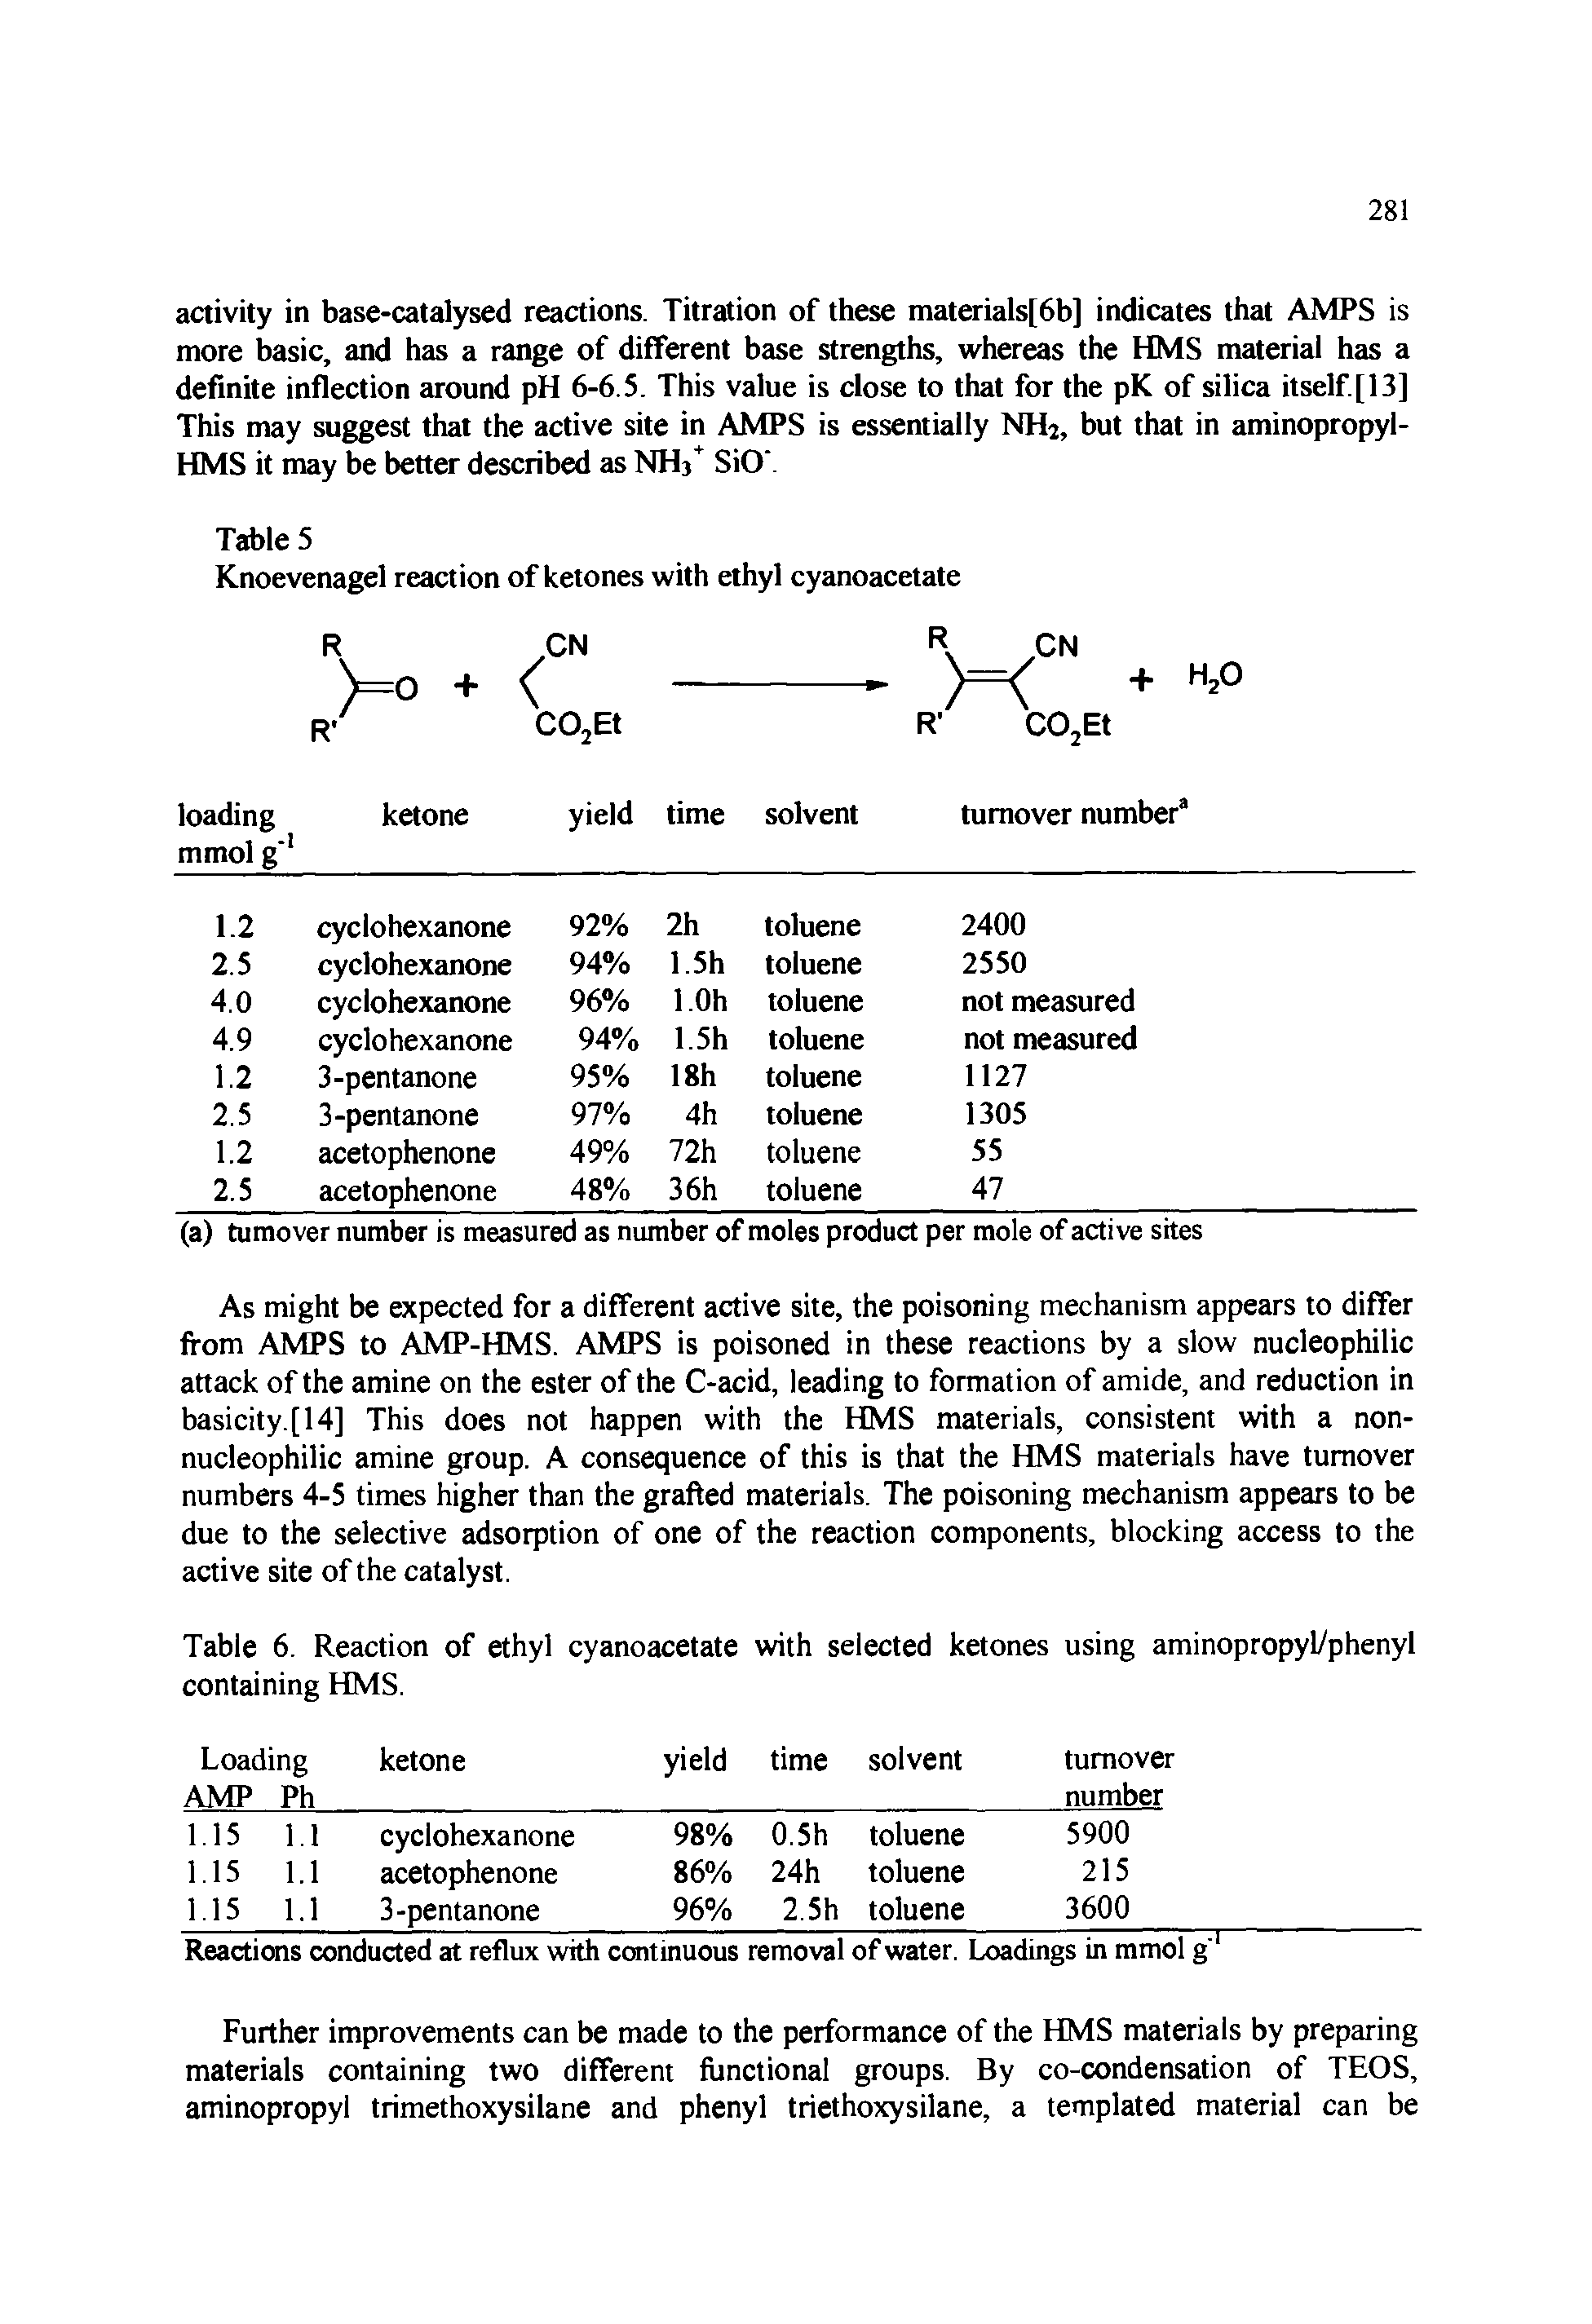 Table 6. Reaction of ethyl cyanoacetate with selected ketones using aminopropyl/phenyl containing HMS.